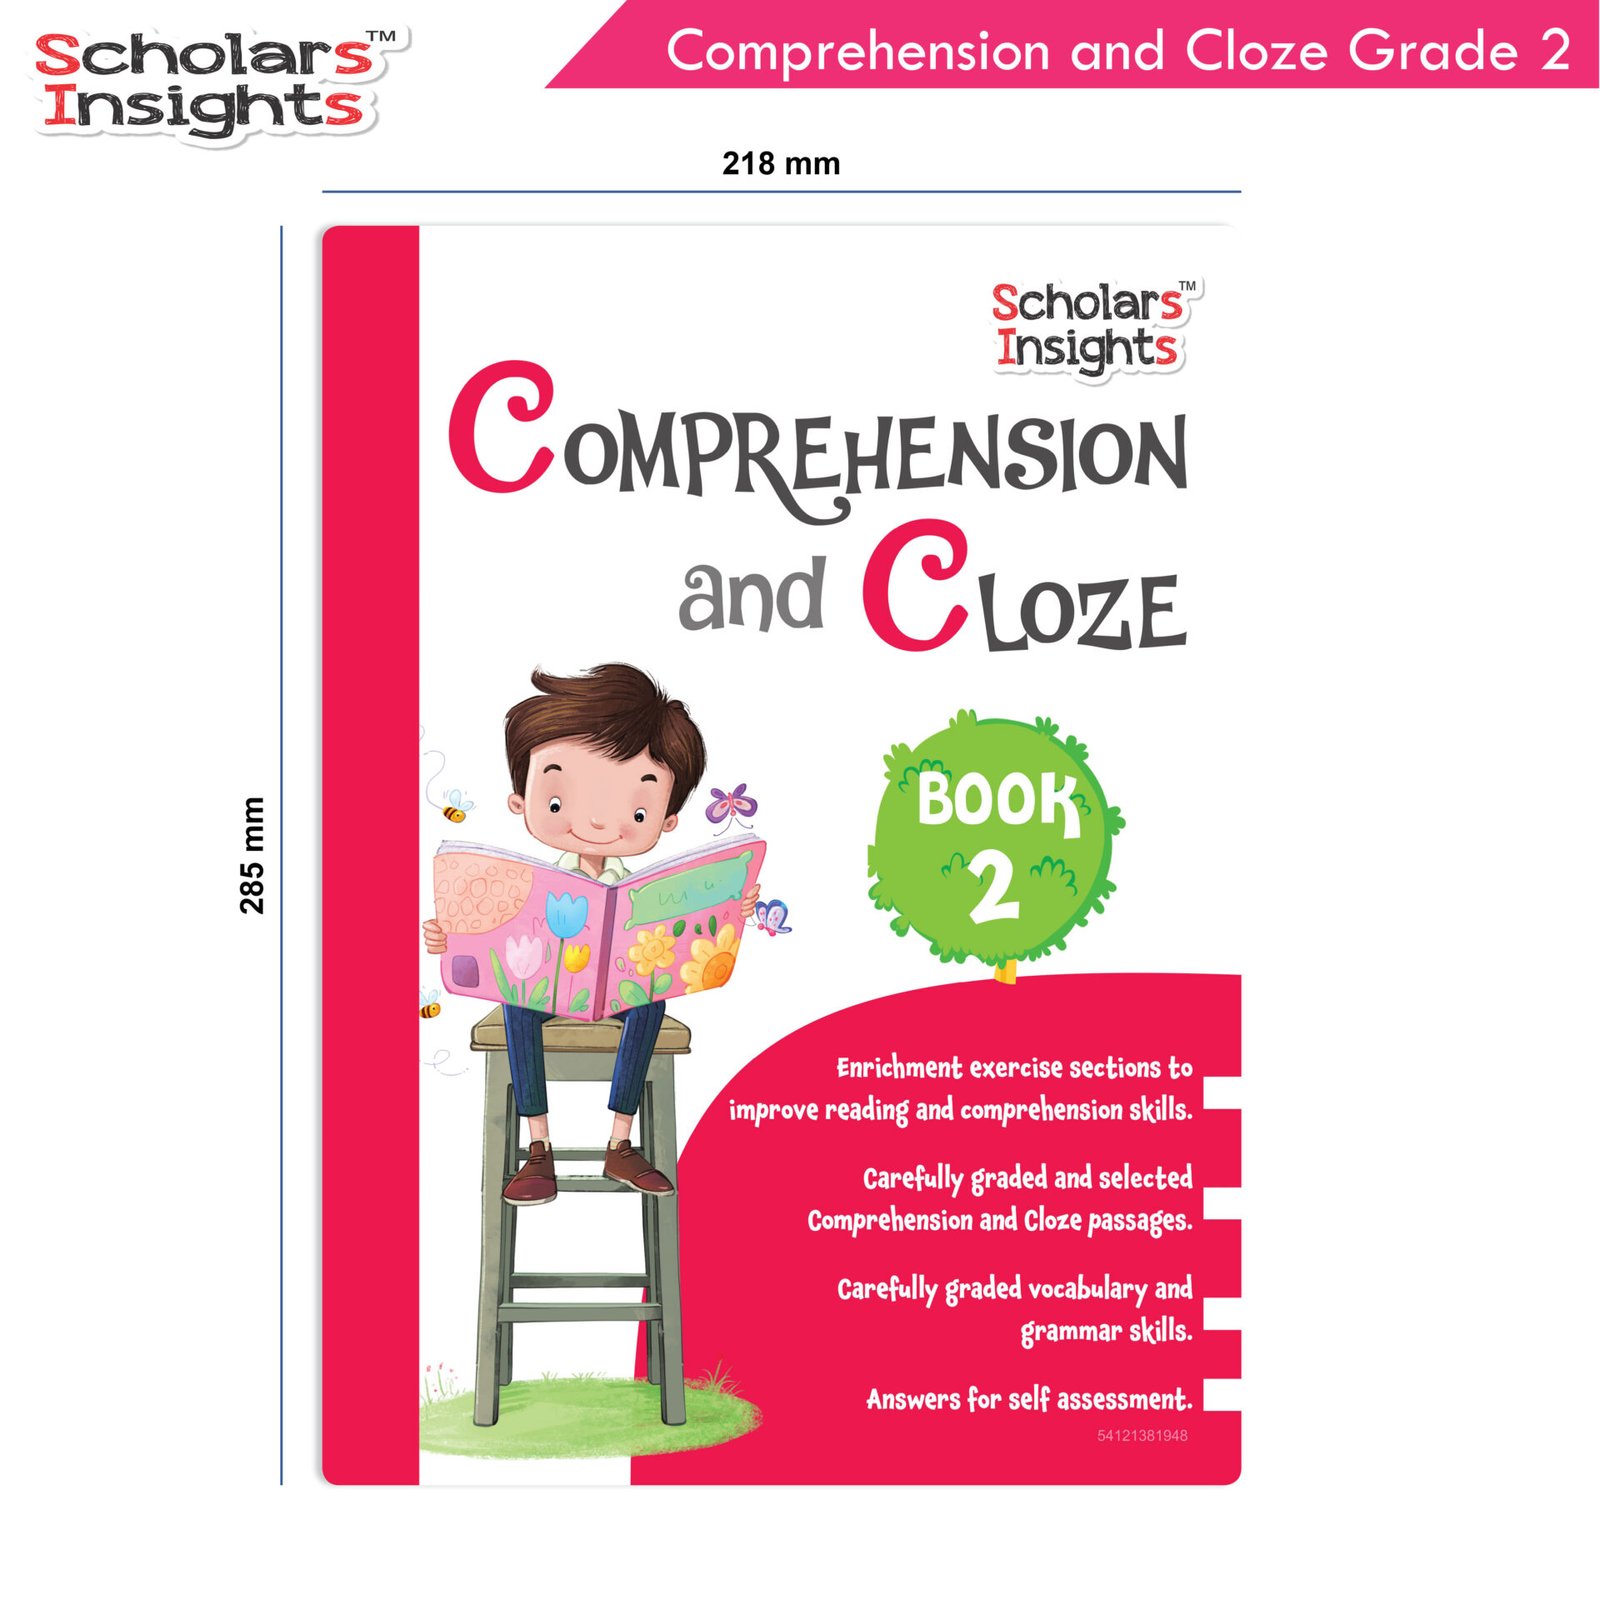 Scholars Insights Comprehension and Cloze Grade 2 2 1